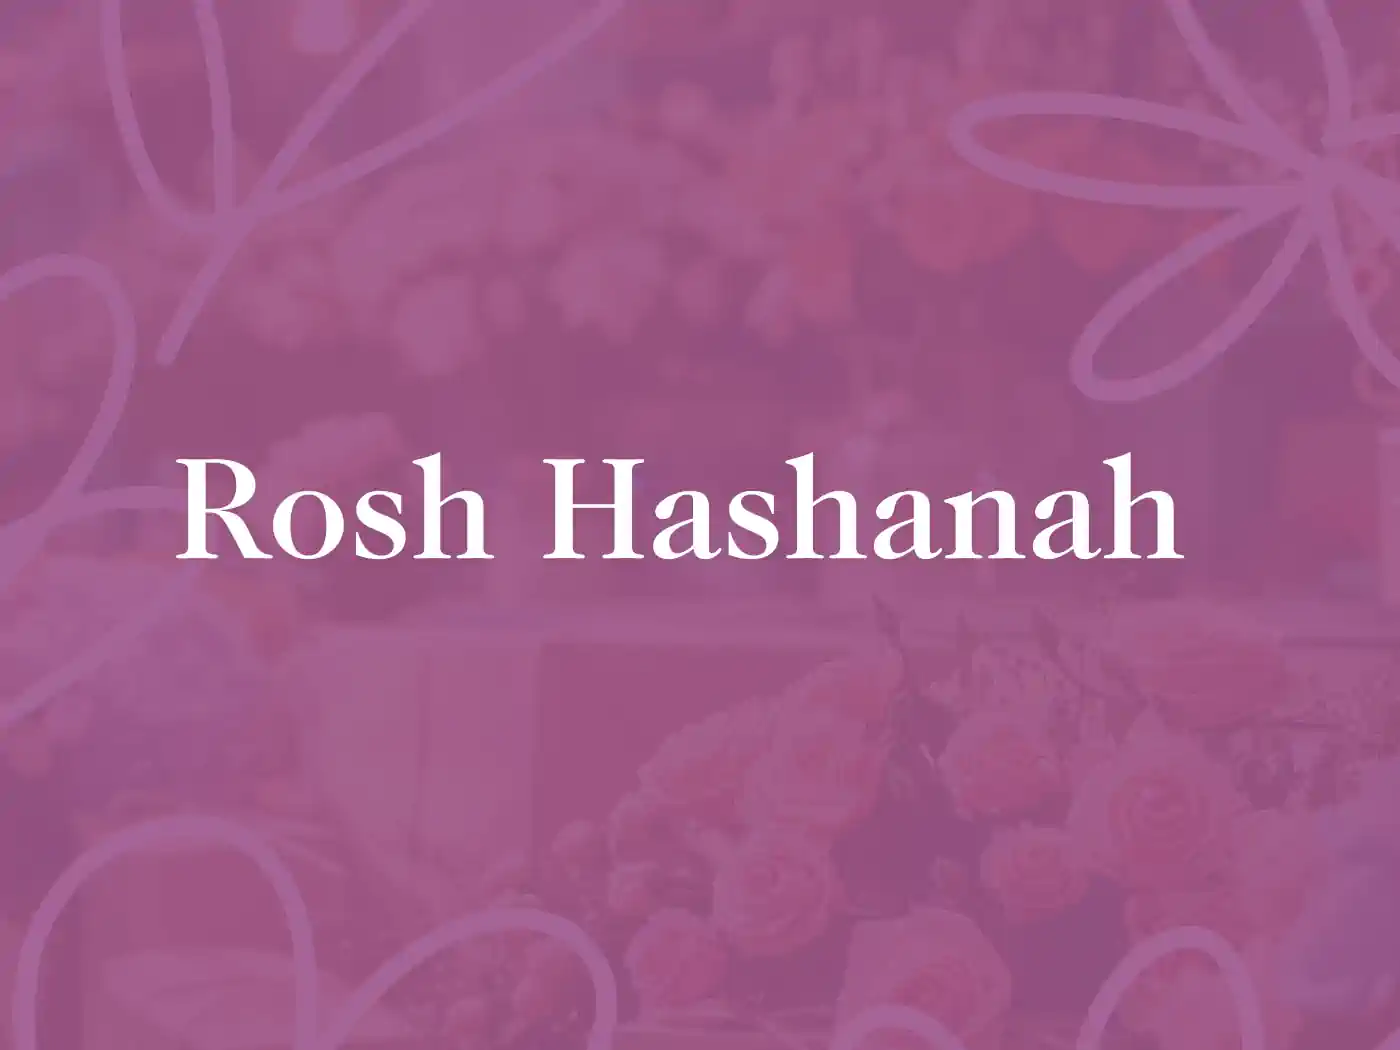 The words "Rosh Hashanah" on a pink floral background. Fabulous Flowers and Gifts - Rosh Hashanah Collection.